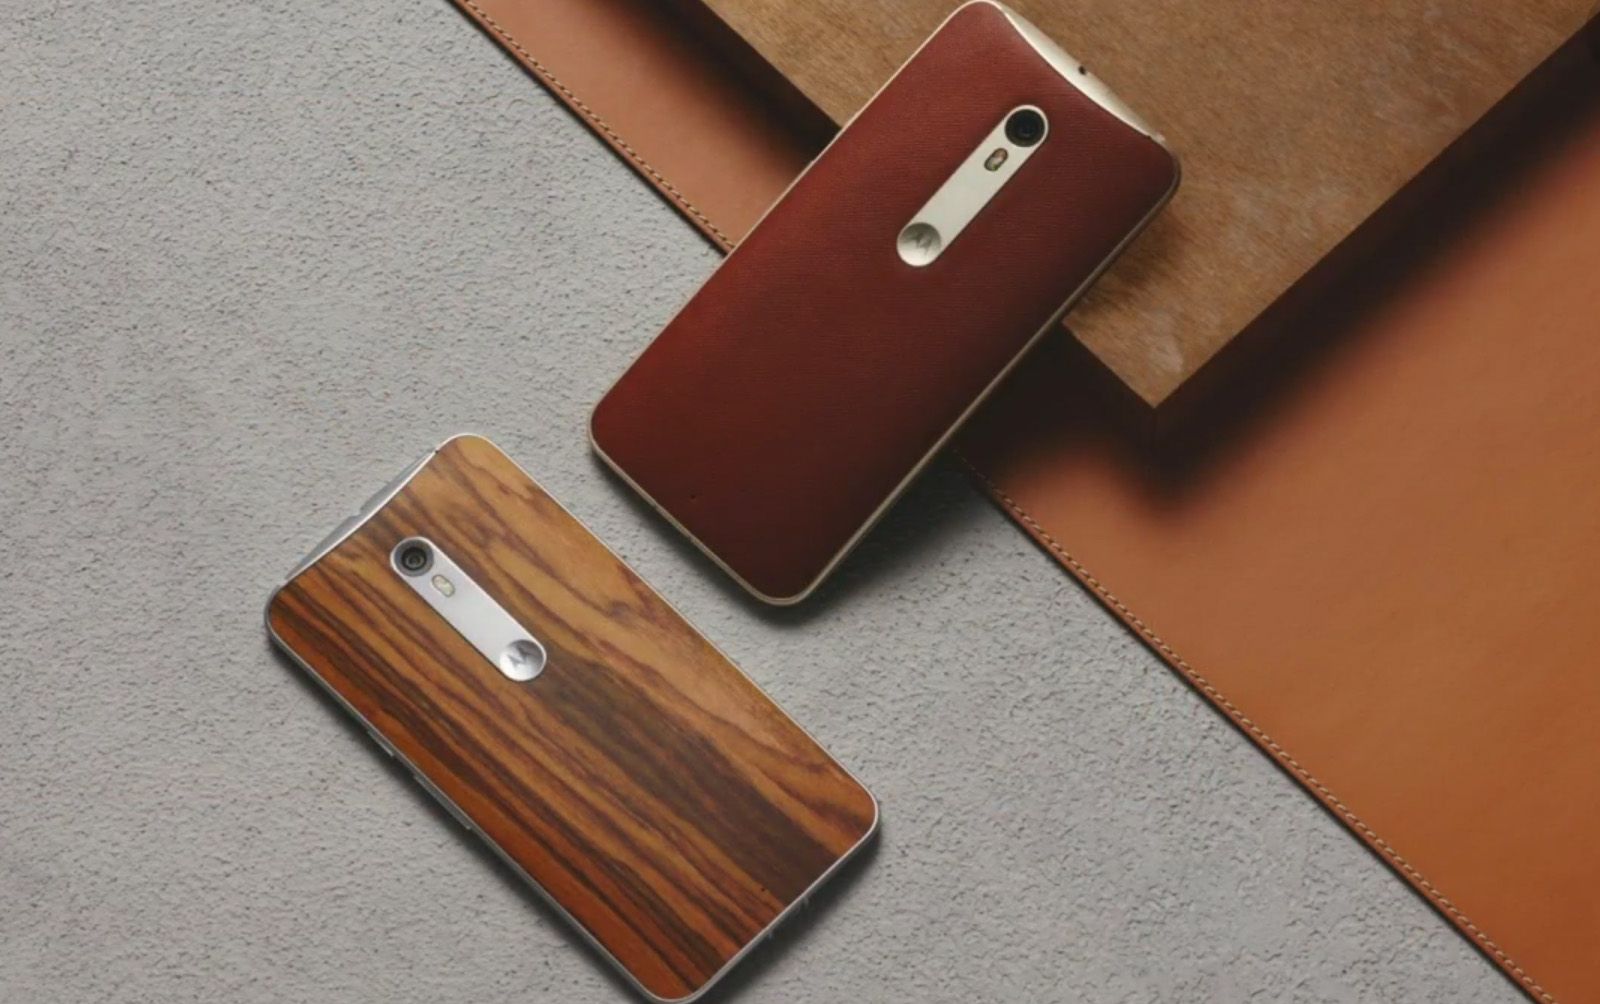 moto x style is the fun and friendly surprise phone from motorola image 1